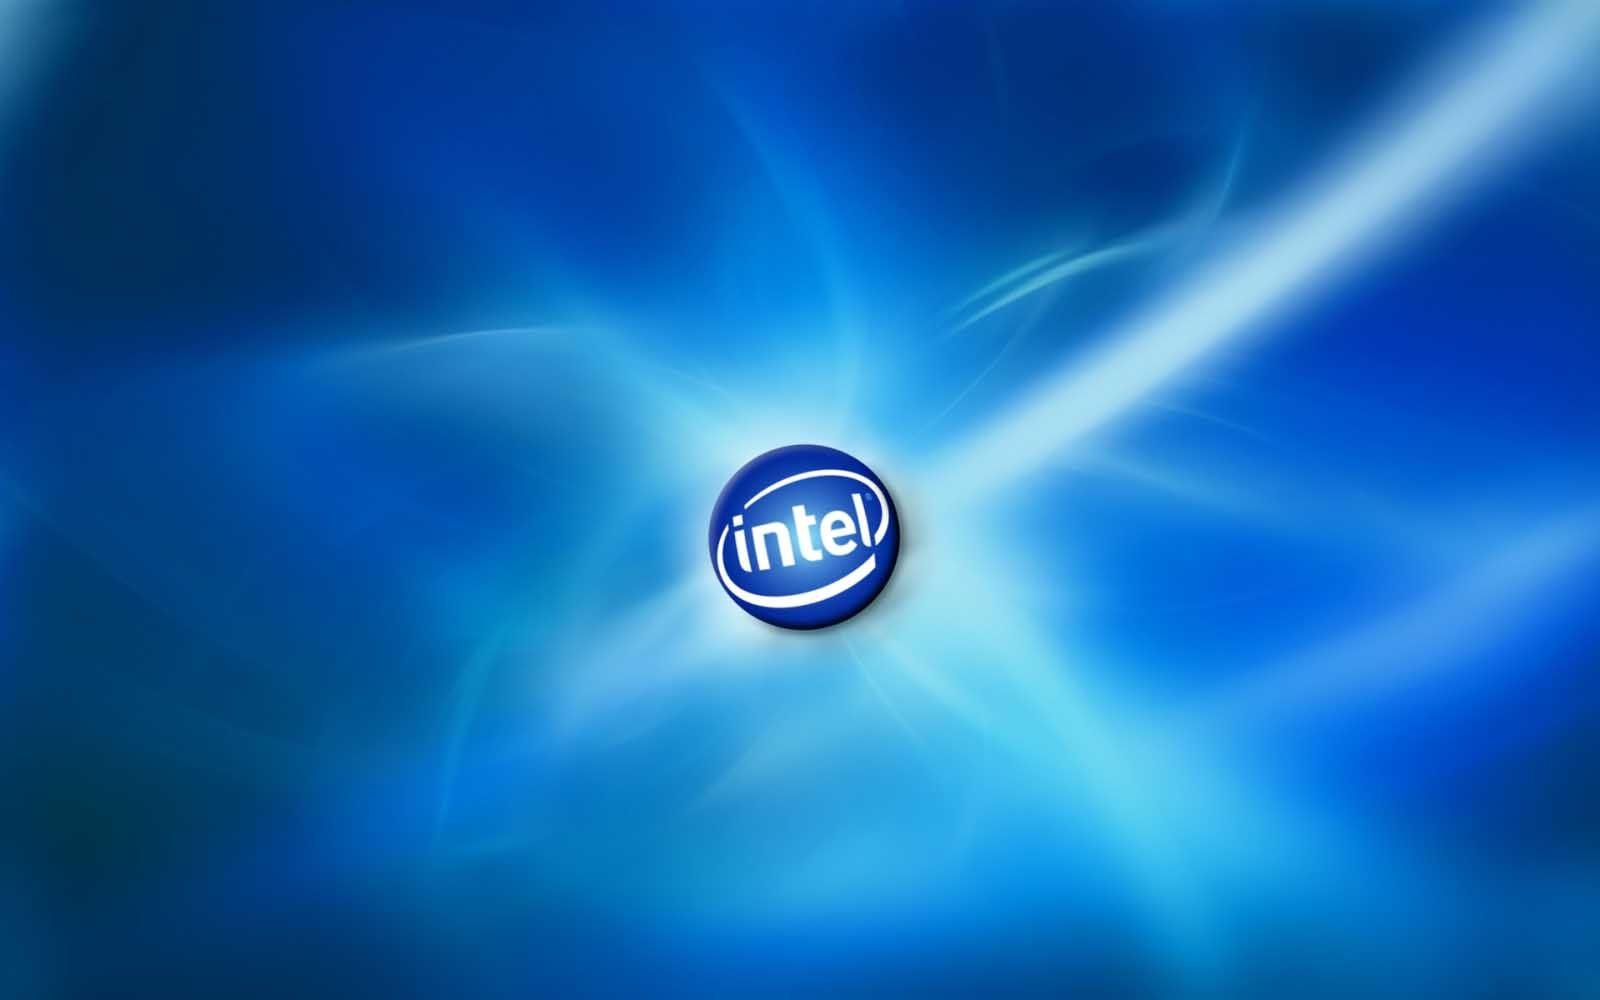 Intel Wallpaper, Full HDQ Intel Picture and Wallpaper Showcase